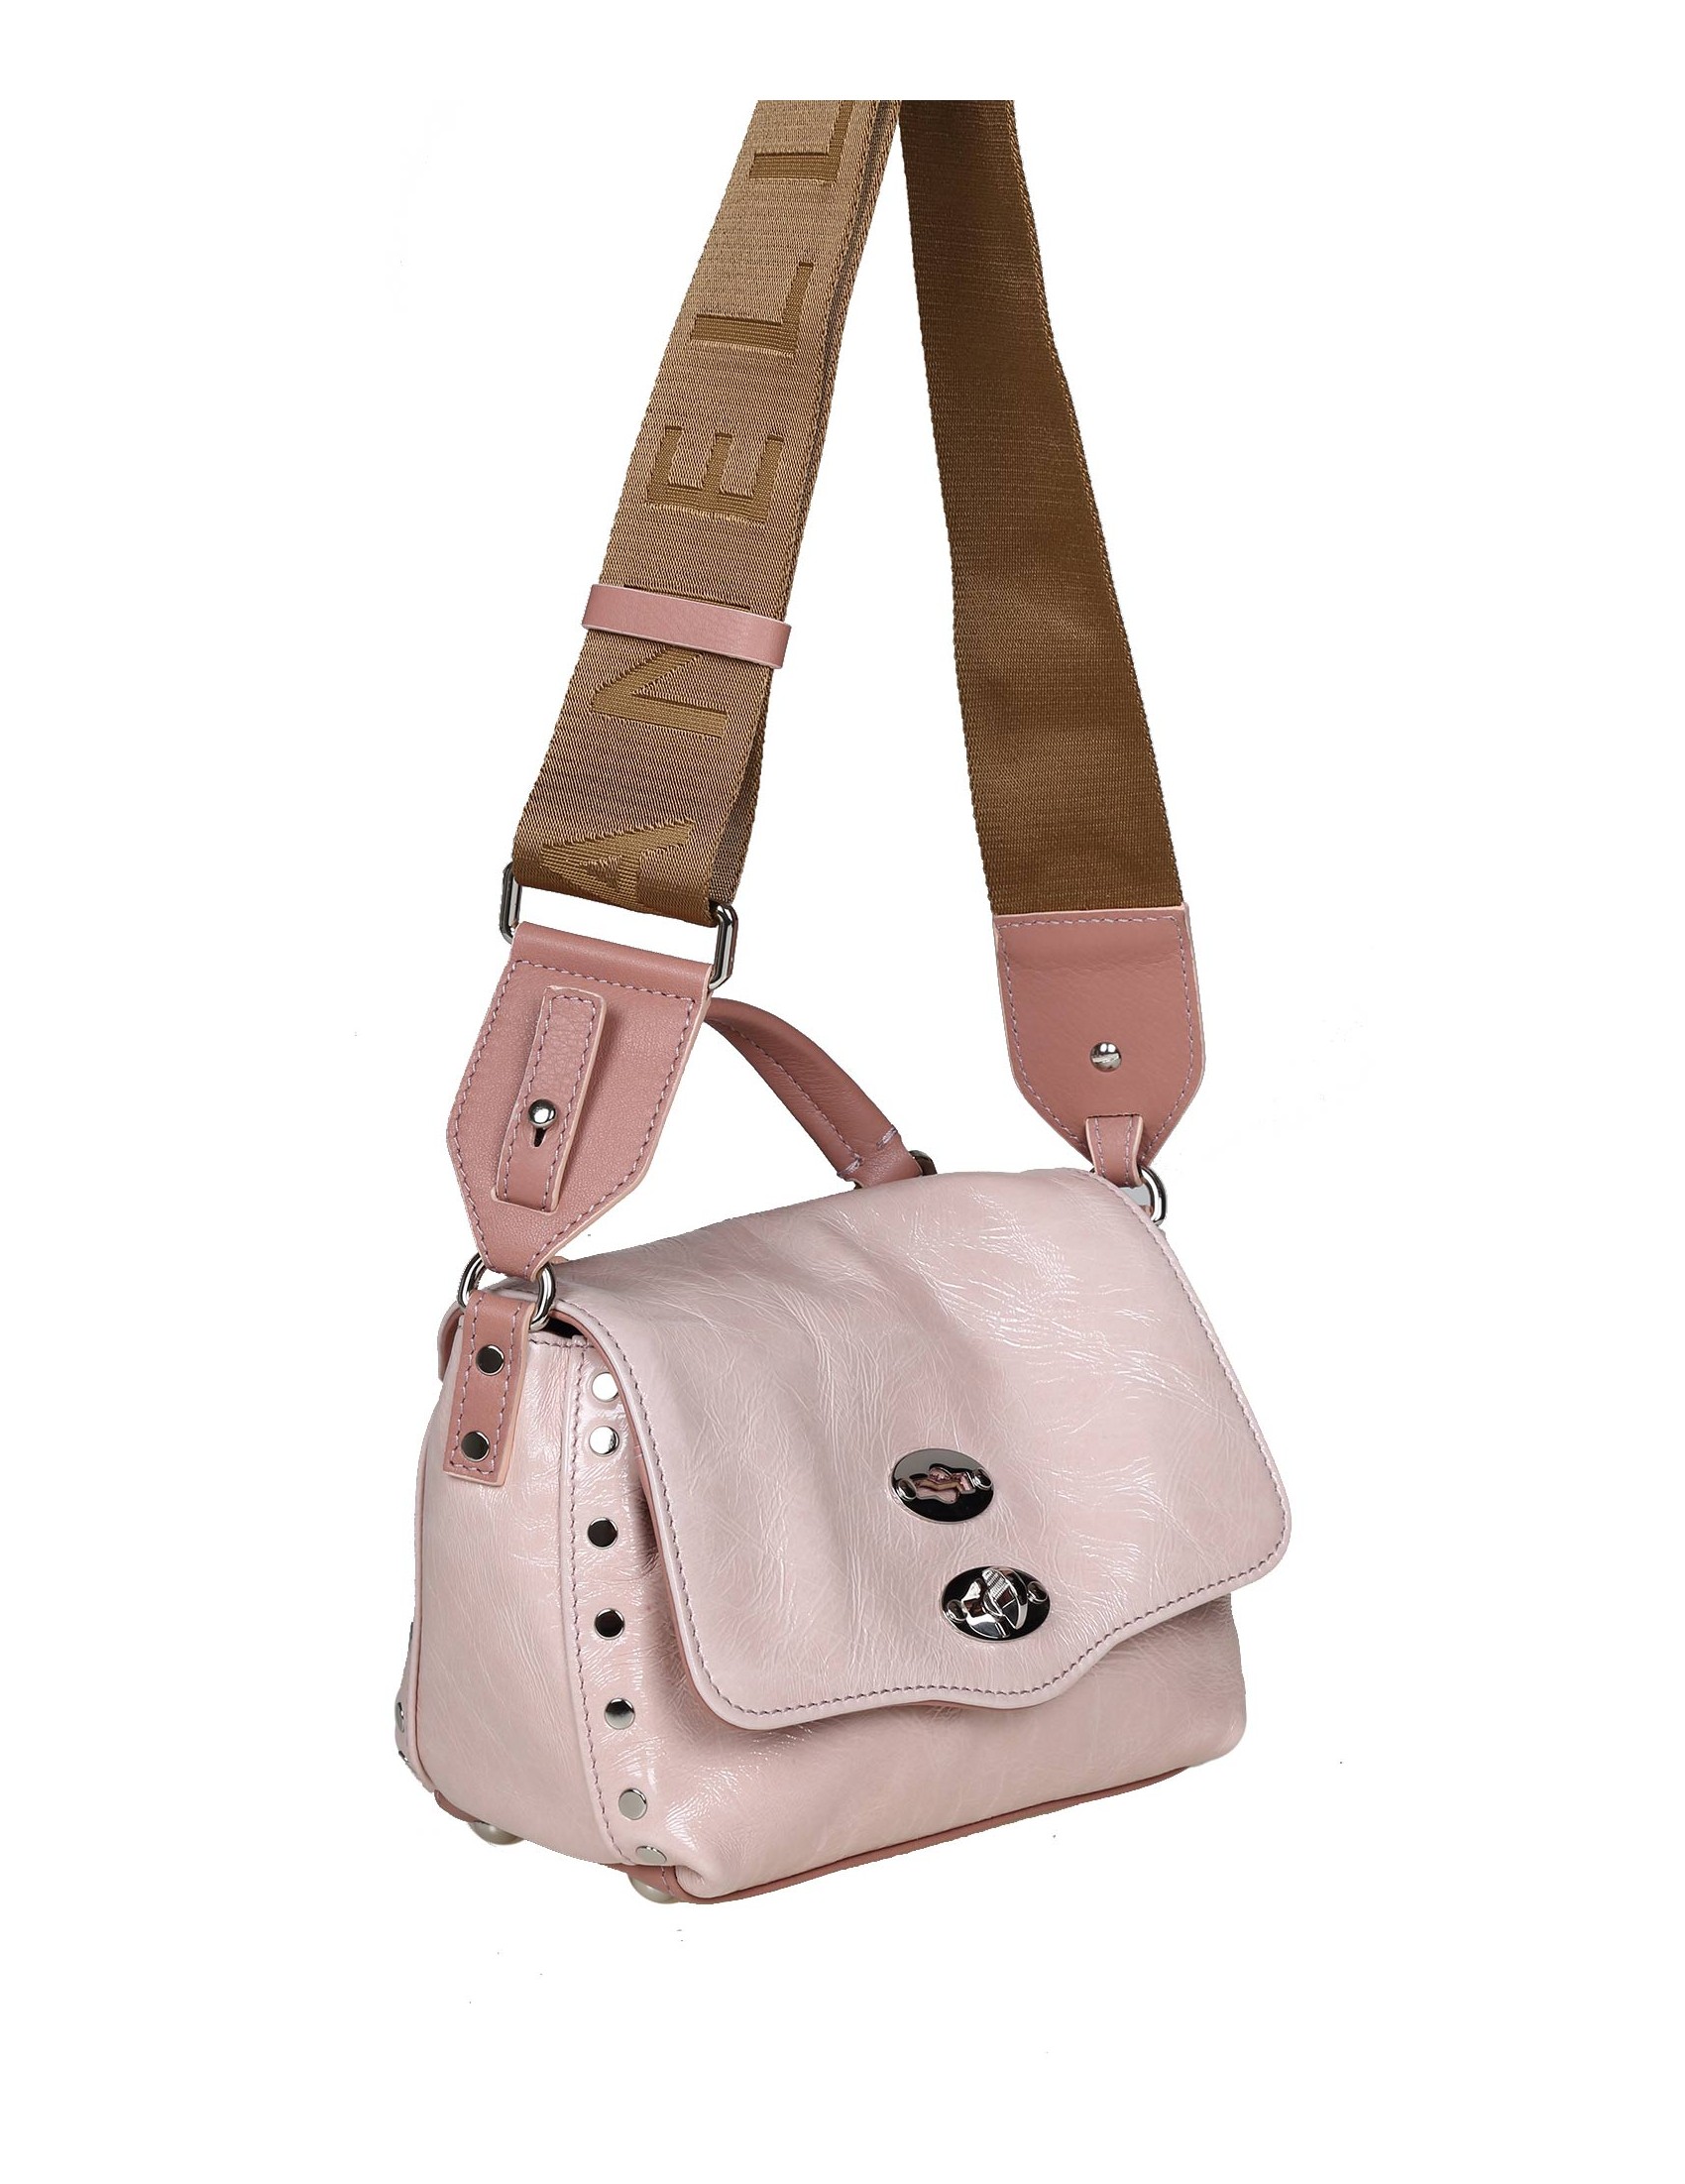 ZANELLATO POSTINA BABY CITY OF ANGELS IN PINK LEATHER